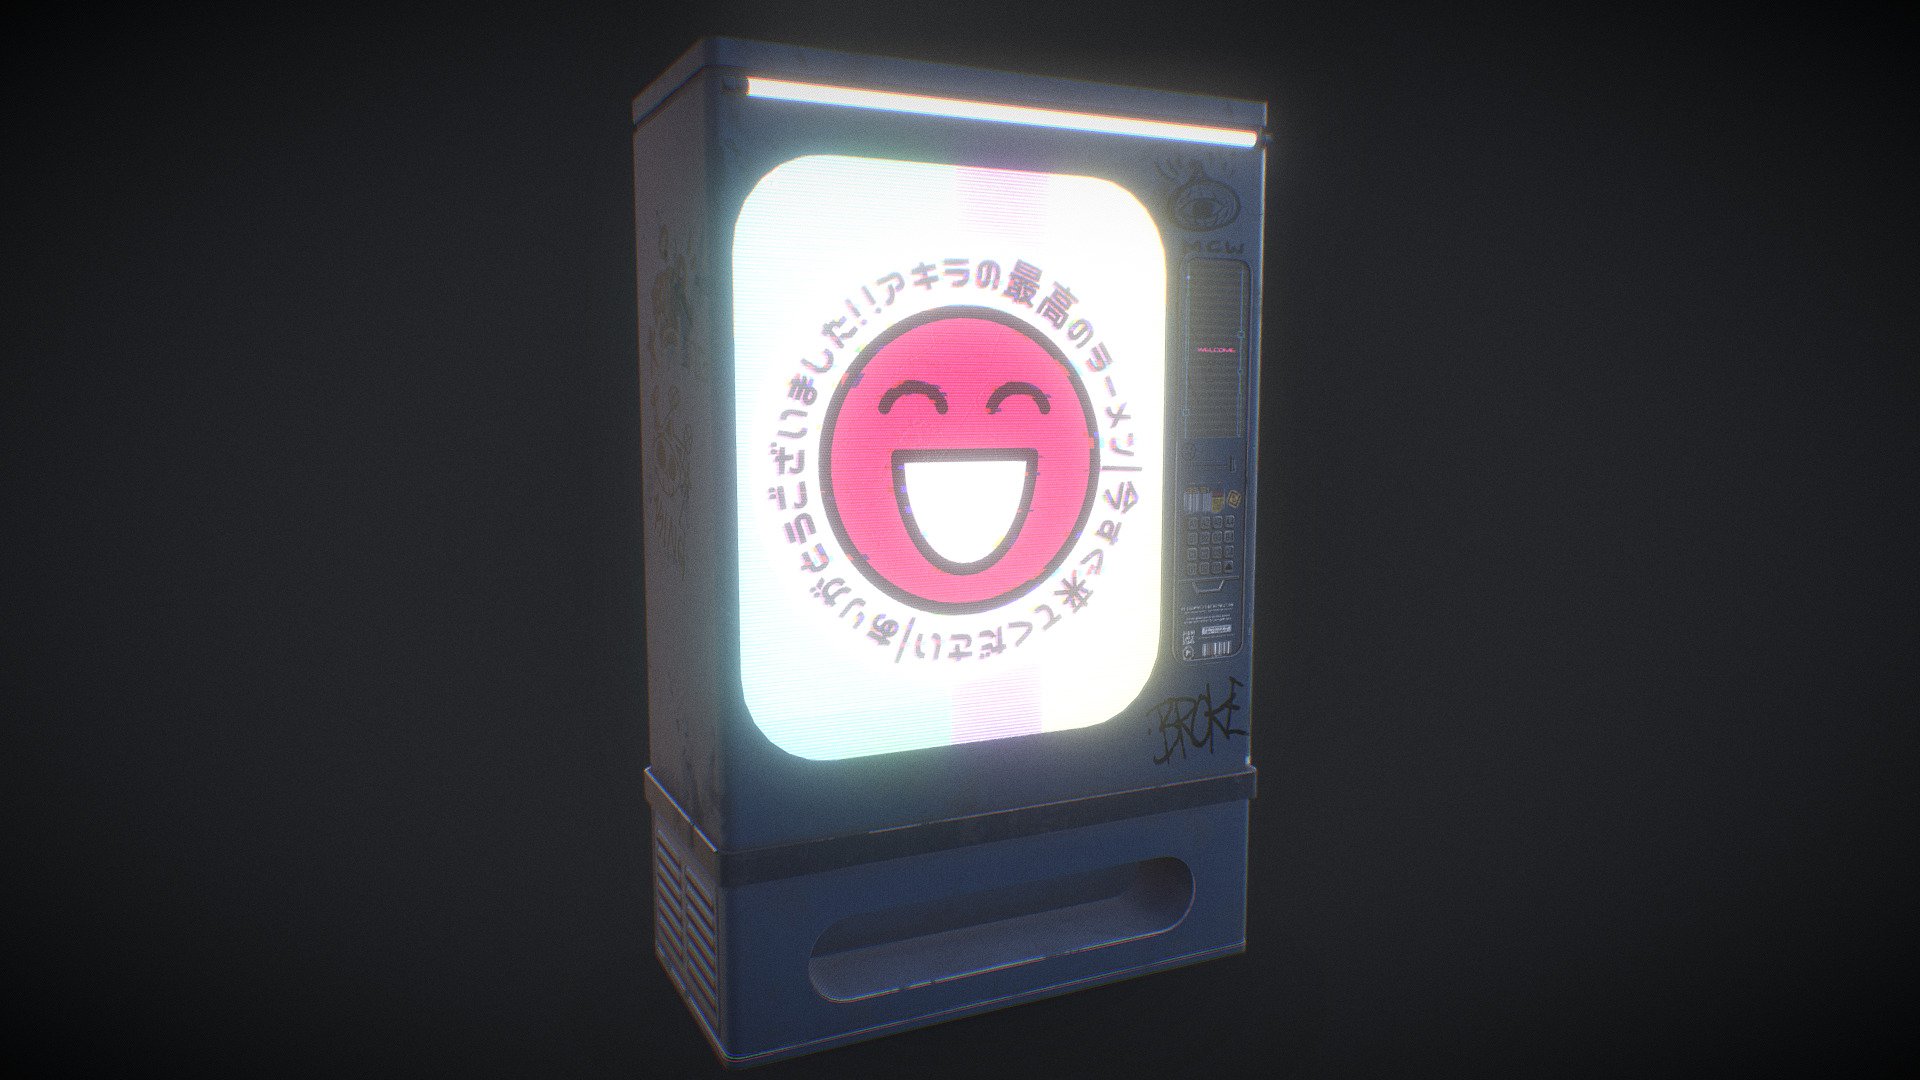 Vending Machine | Made in Blender and textured in Substance.

4096x4096 textures and Diffuse, Roughness, Metallic, AO, Normal, and Emissive.

Includes .obj, .fbx, and .dae files 3d model